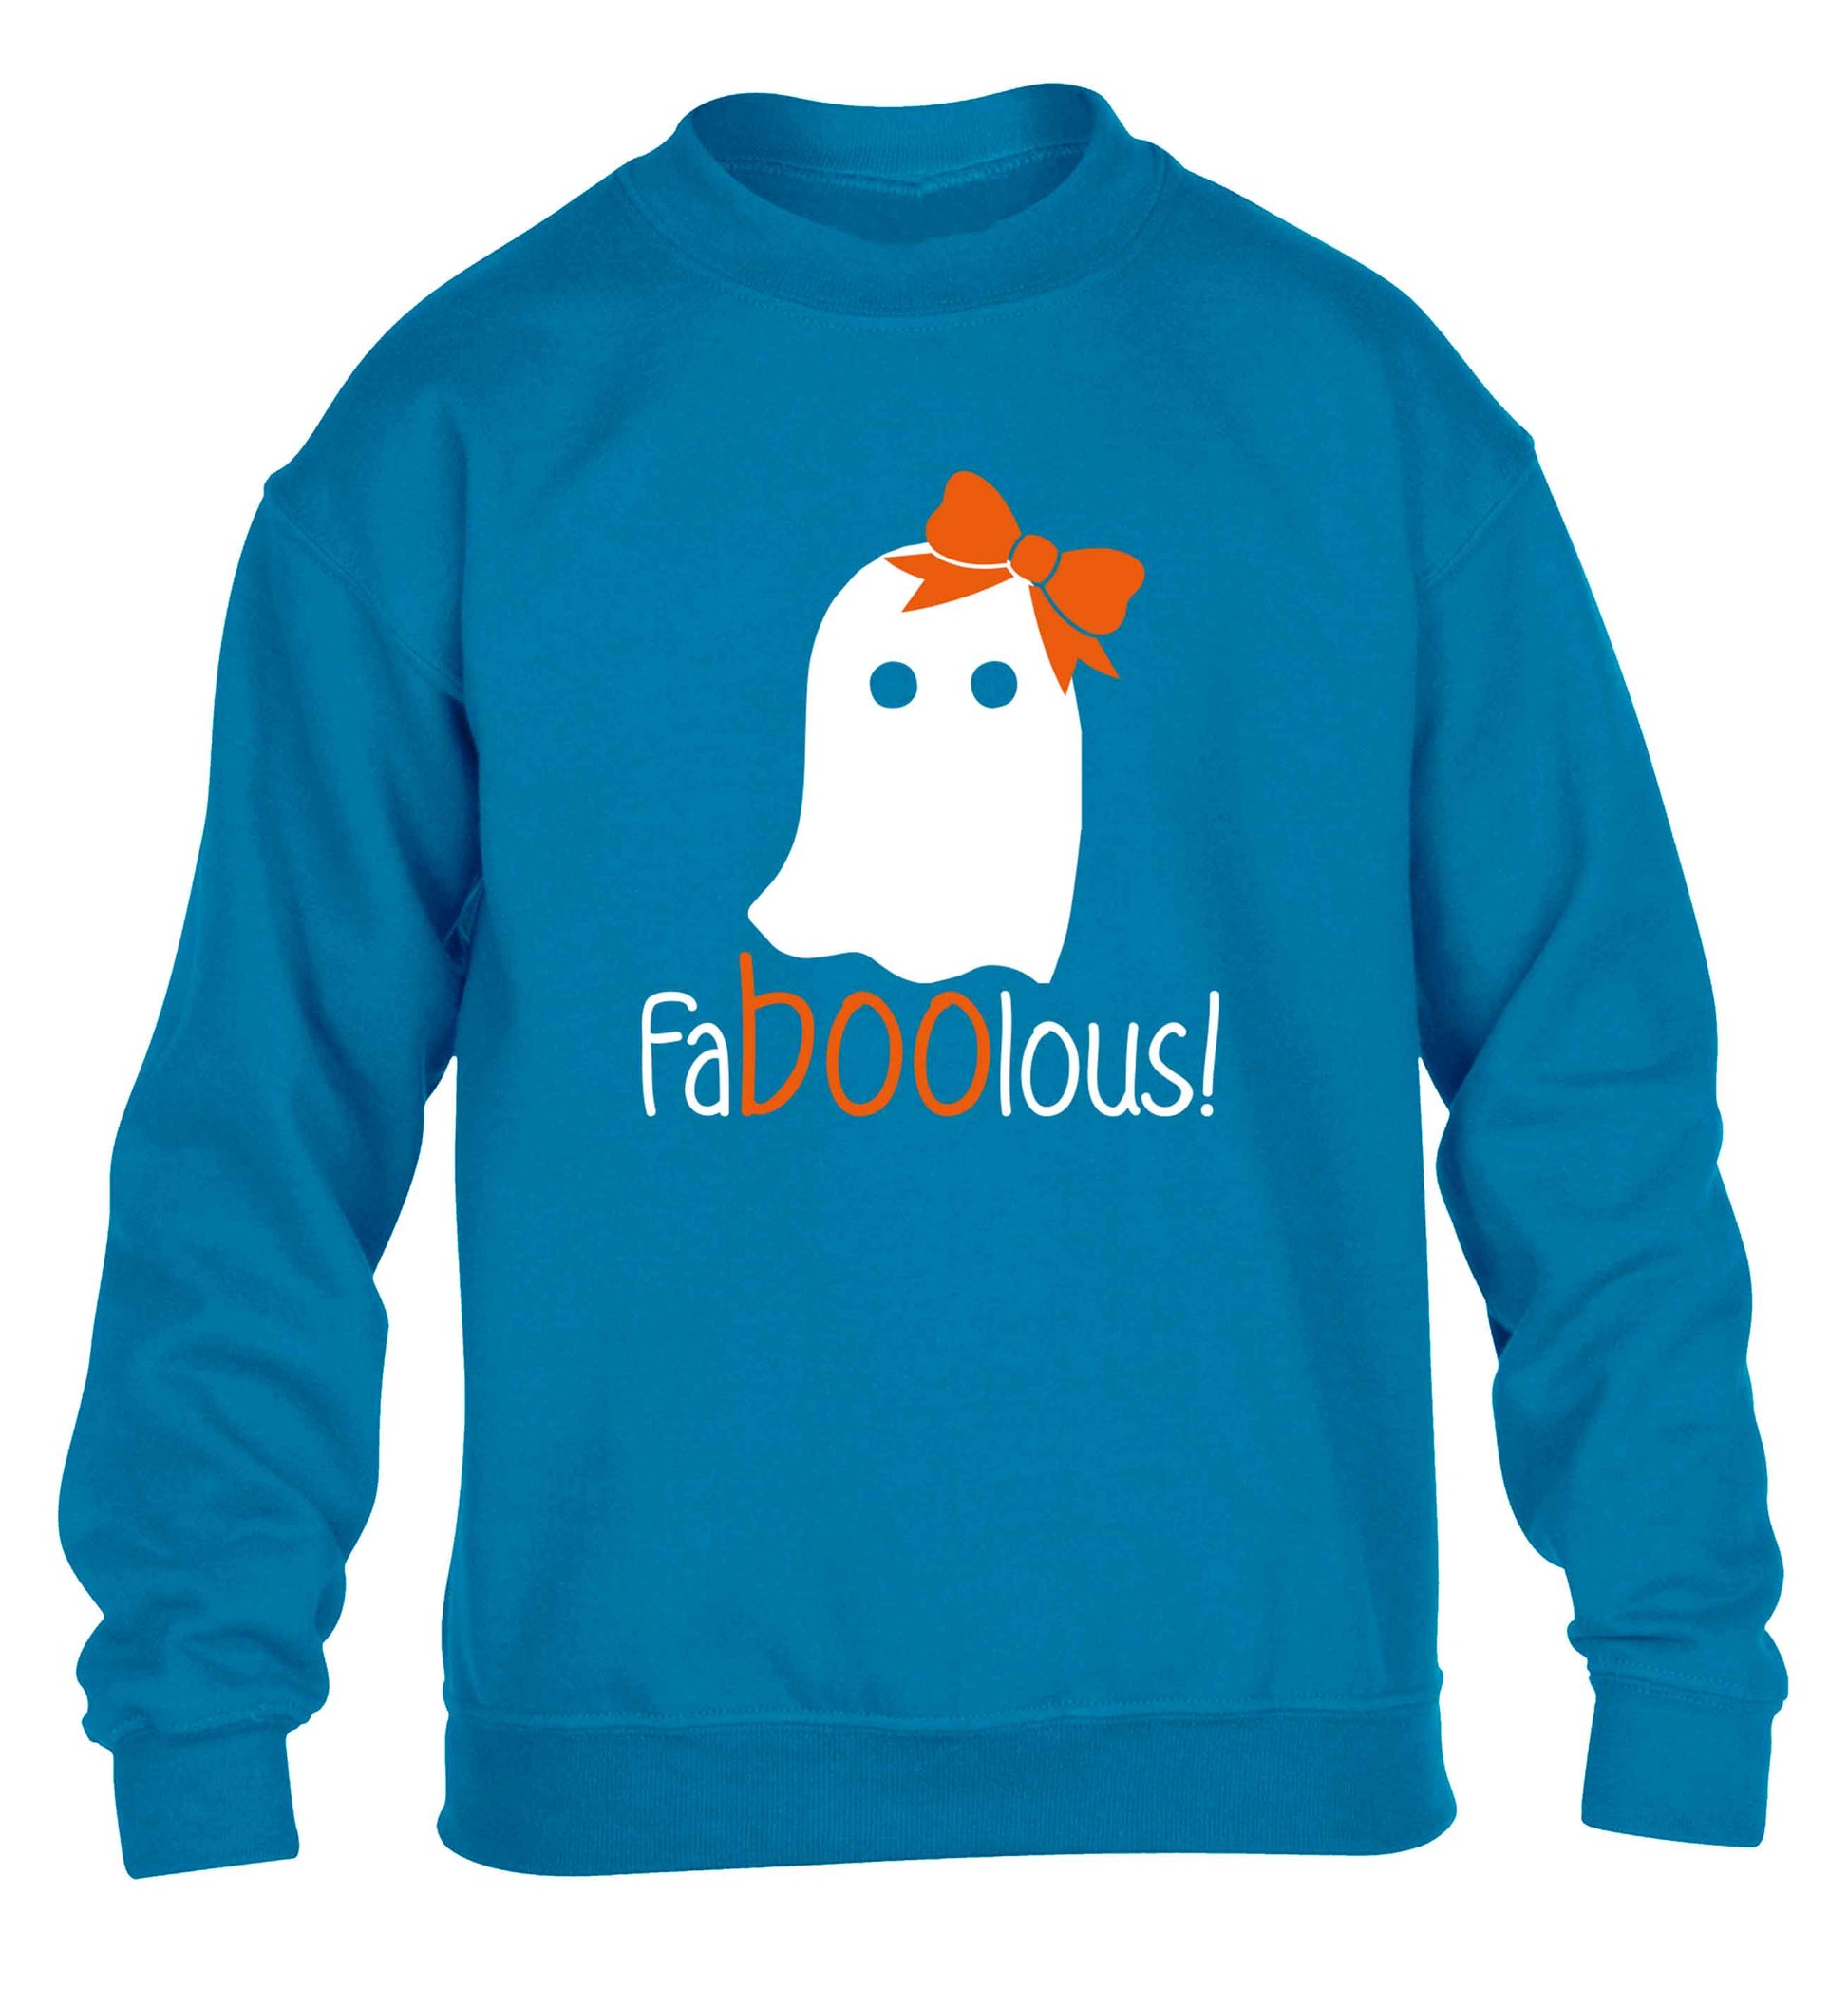 Faboolous ghost children's blue sweater 12-13 Years